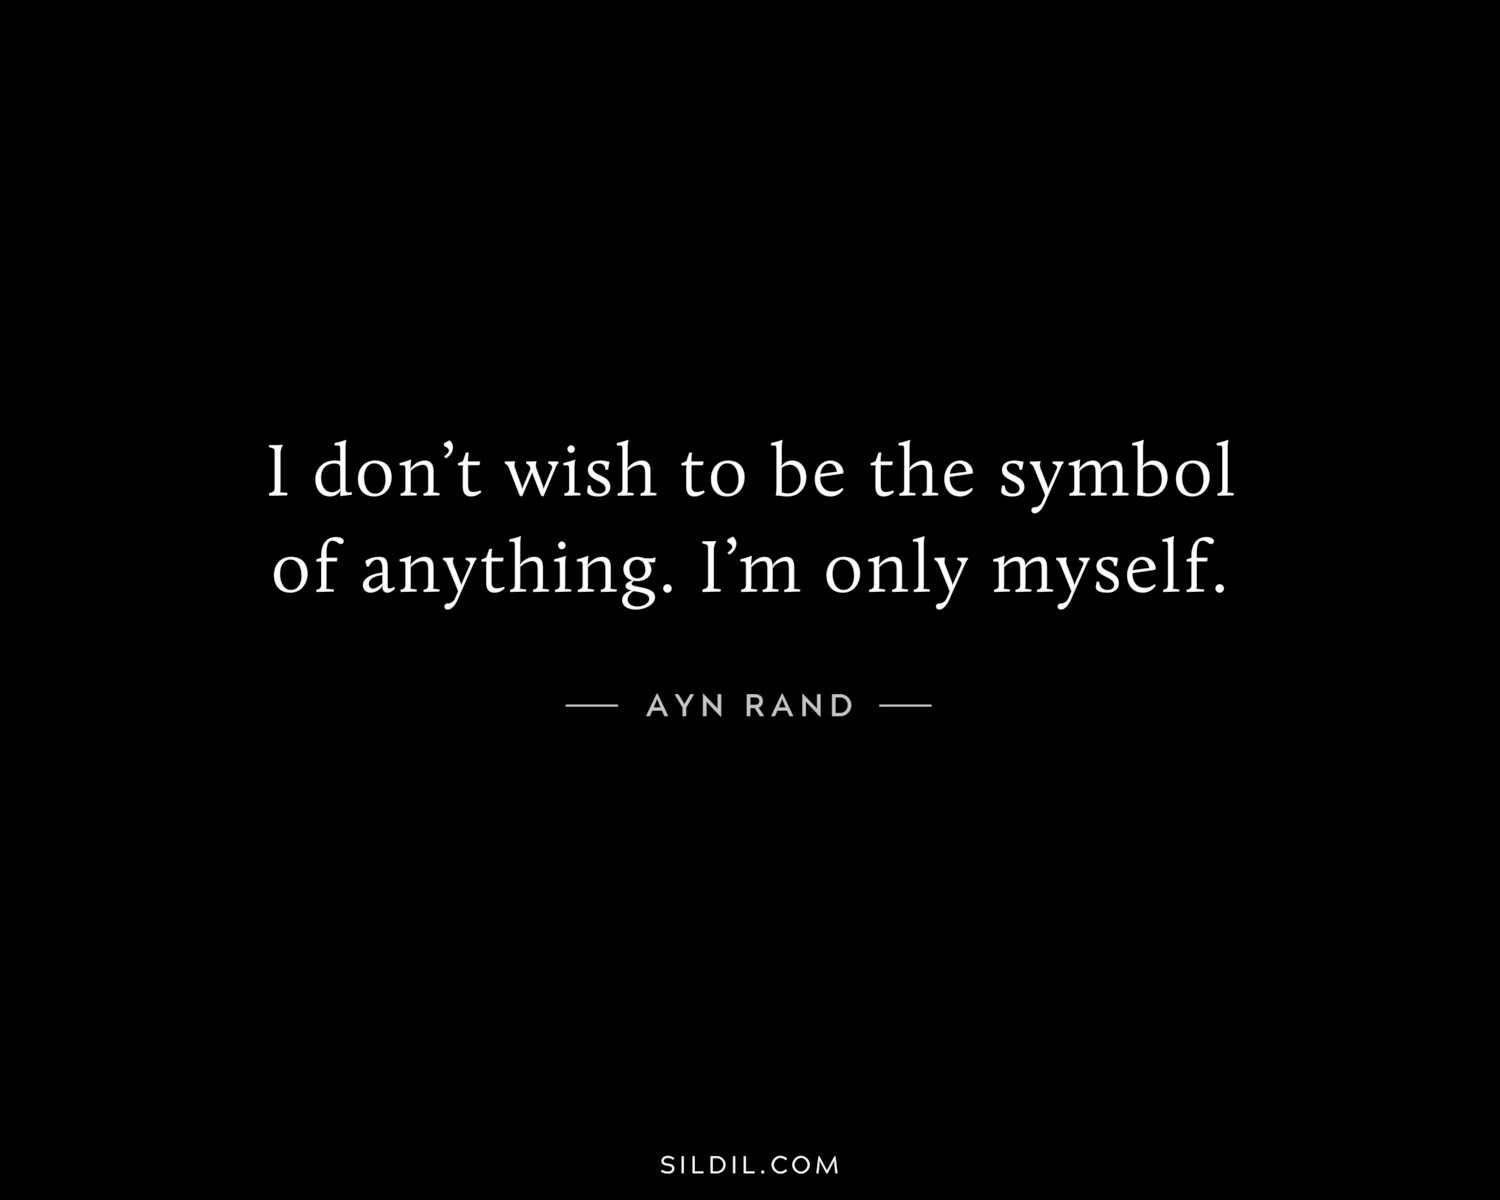 I don’t wish to be the symbol of anything. I’m only myself.